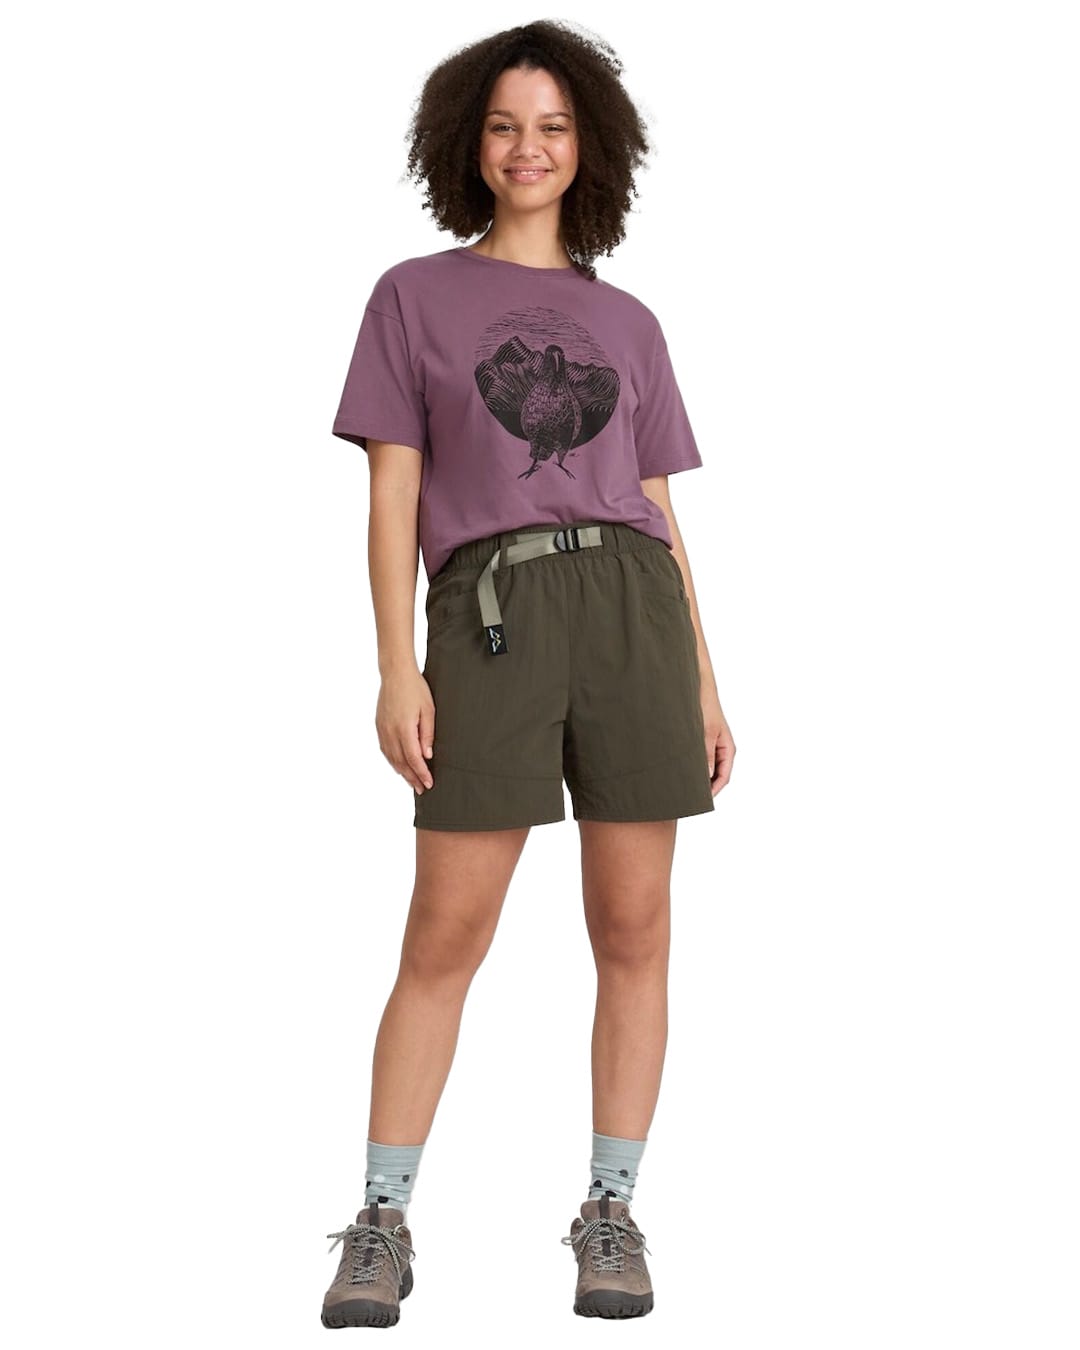 Kathmandu’s Zany New Collab With Jason Woodside Brings Bulk Colour to Your Outdoor Outfit, sponsored, outdoor gear, outdoor kit, outdoor fashion, woman modelling the evry-day women's cargo short from the kathmandu summer range